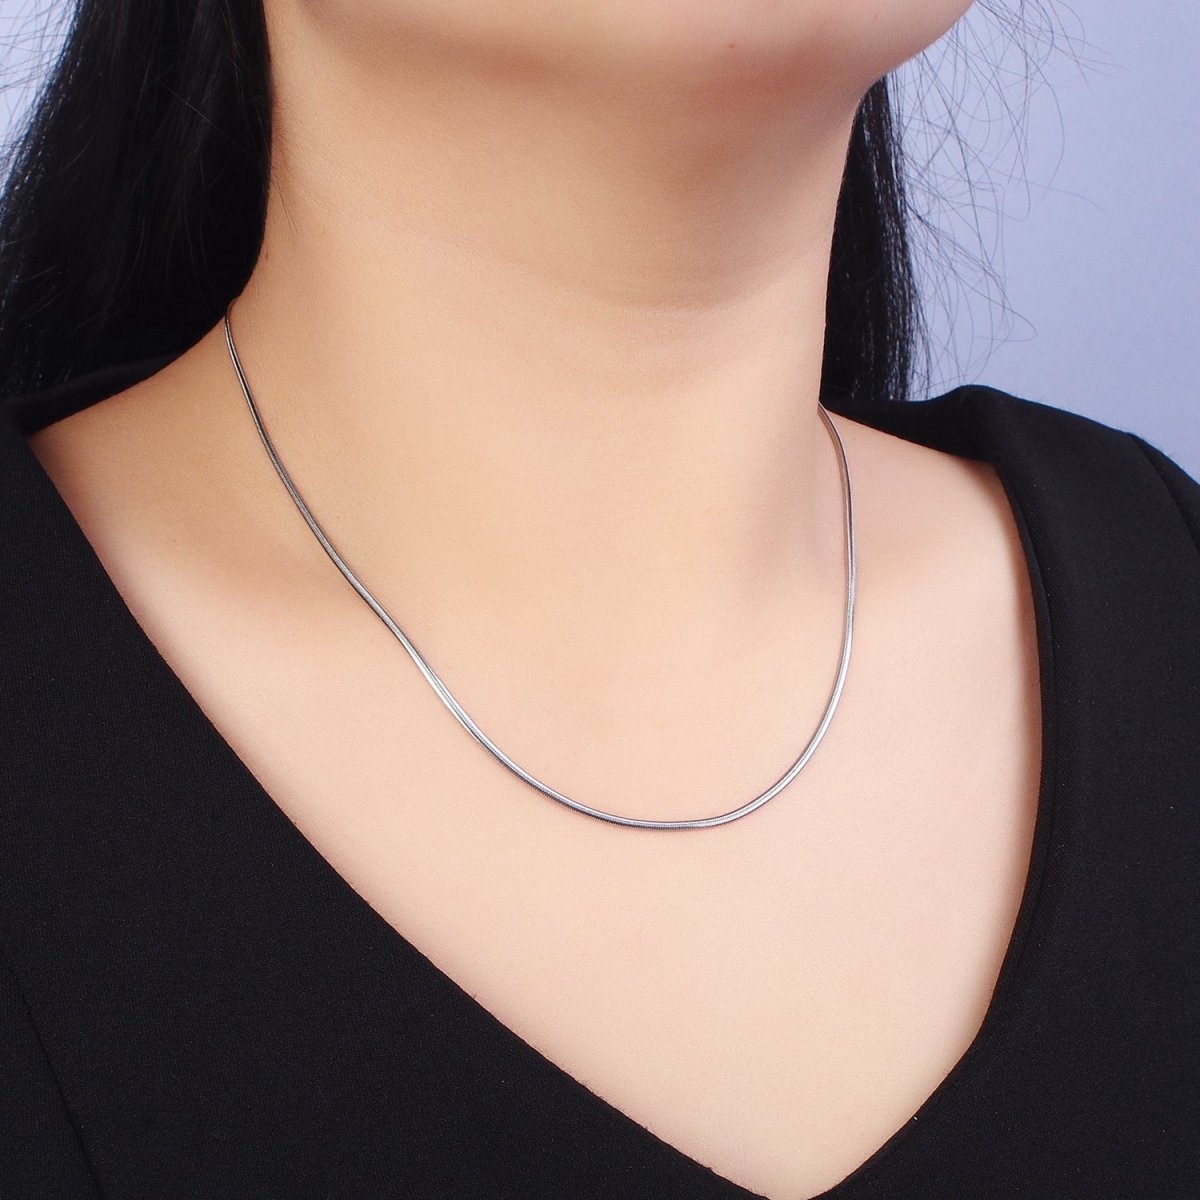 Herringbone Necklace in Gold Stainless Steel Snake Chain 17.75 inch Dainty Ready to Wear Chain for Minimalist Jewelry | WA-1548 WA-1549 Clearance Pricing - DLUXCA